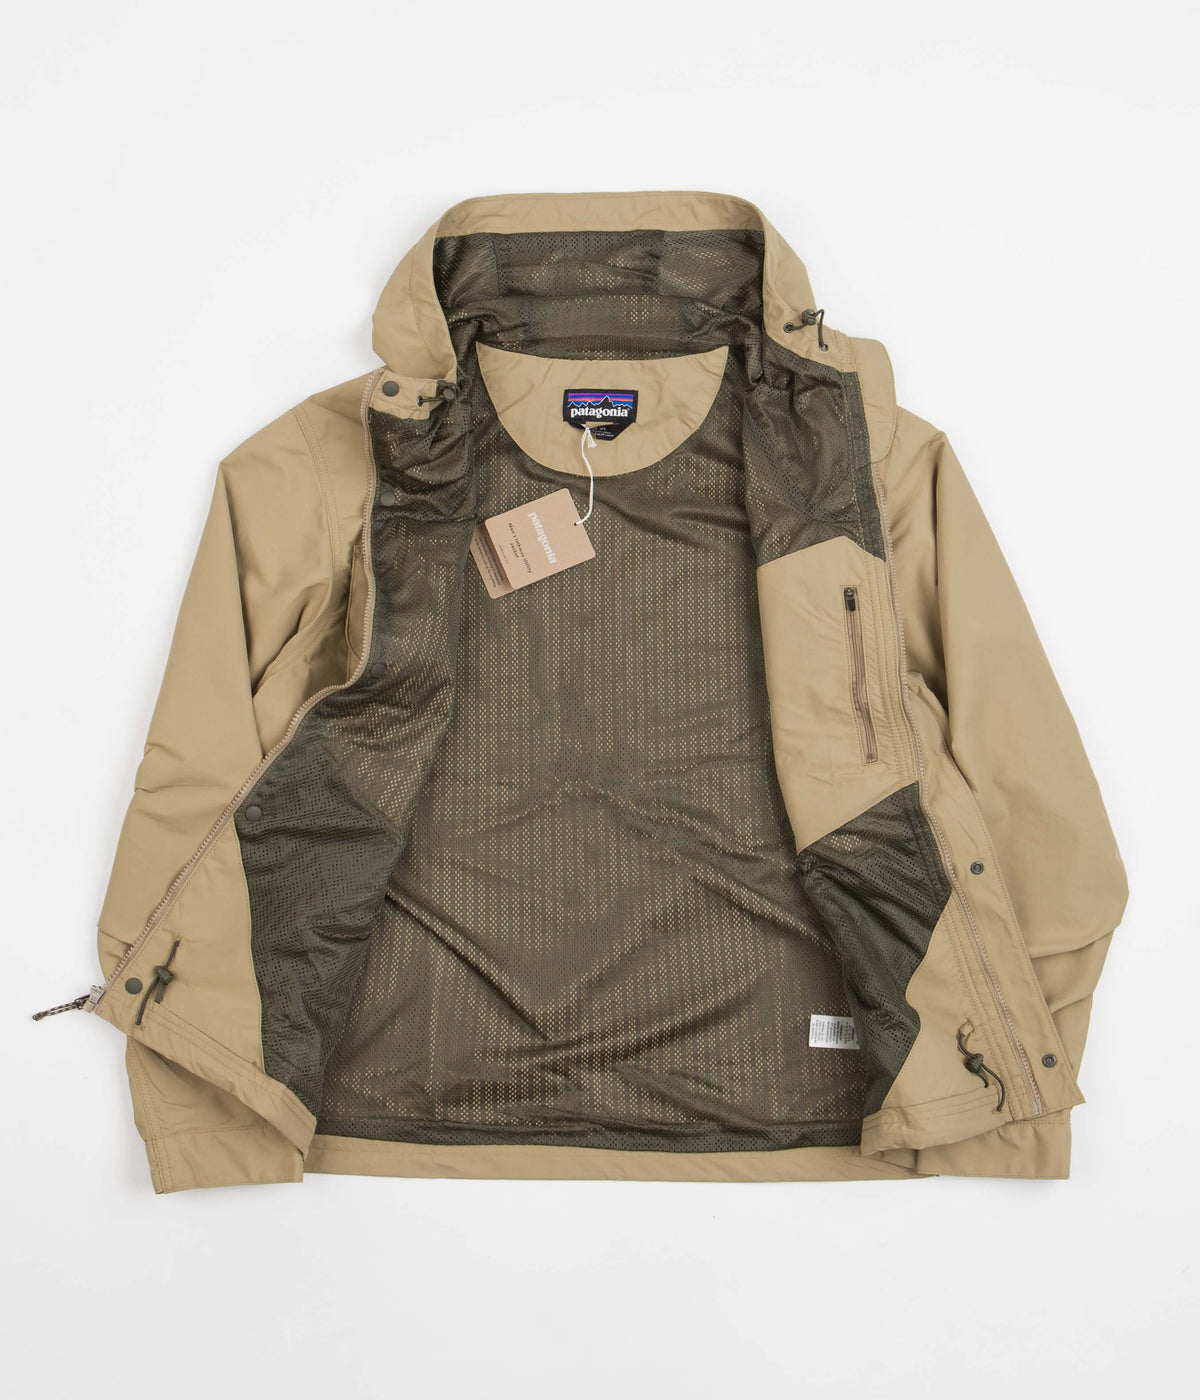 Patagonia Isthmus Utility Jacket - Classic Tan | Always in Colour